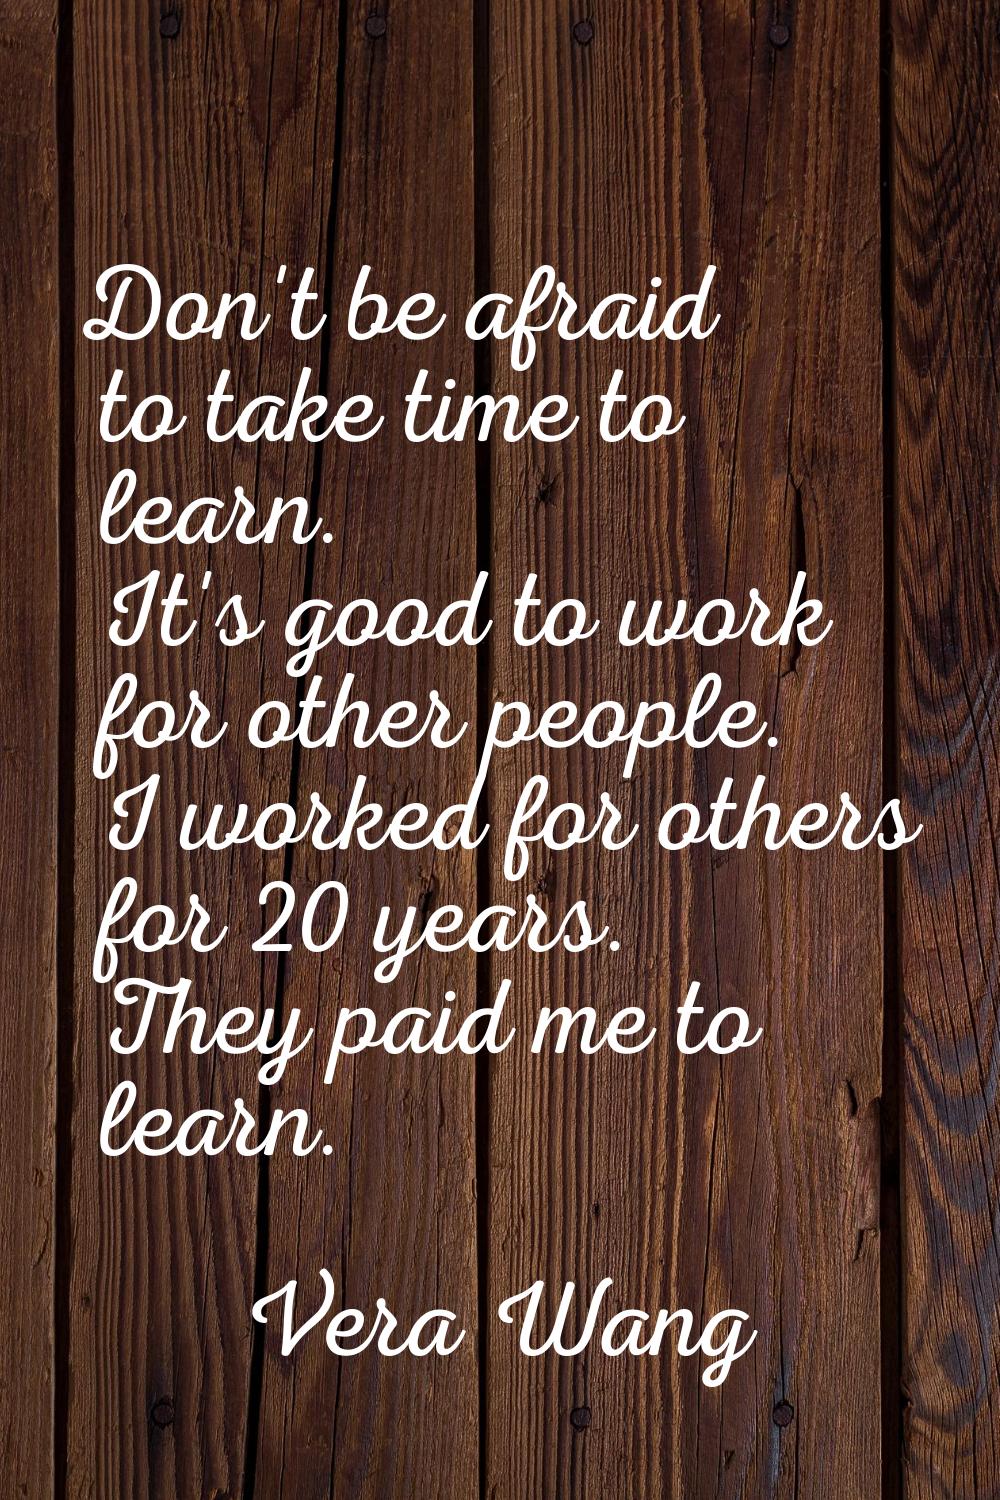 Don't be afraid to take time to learn. It's good to work for other people. I worked for others for 